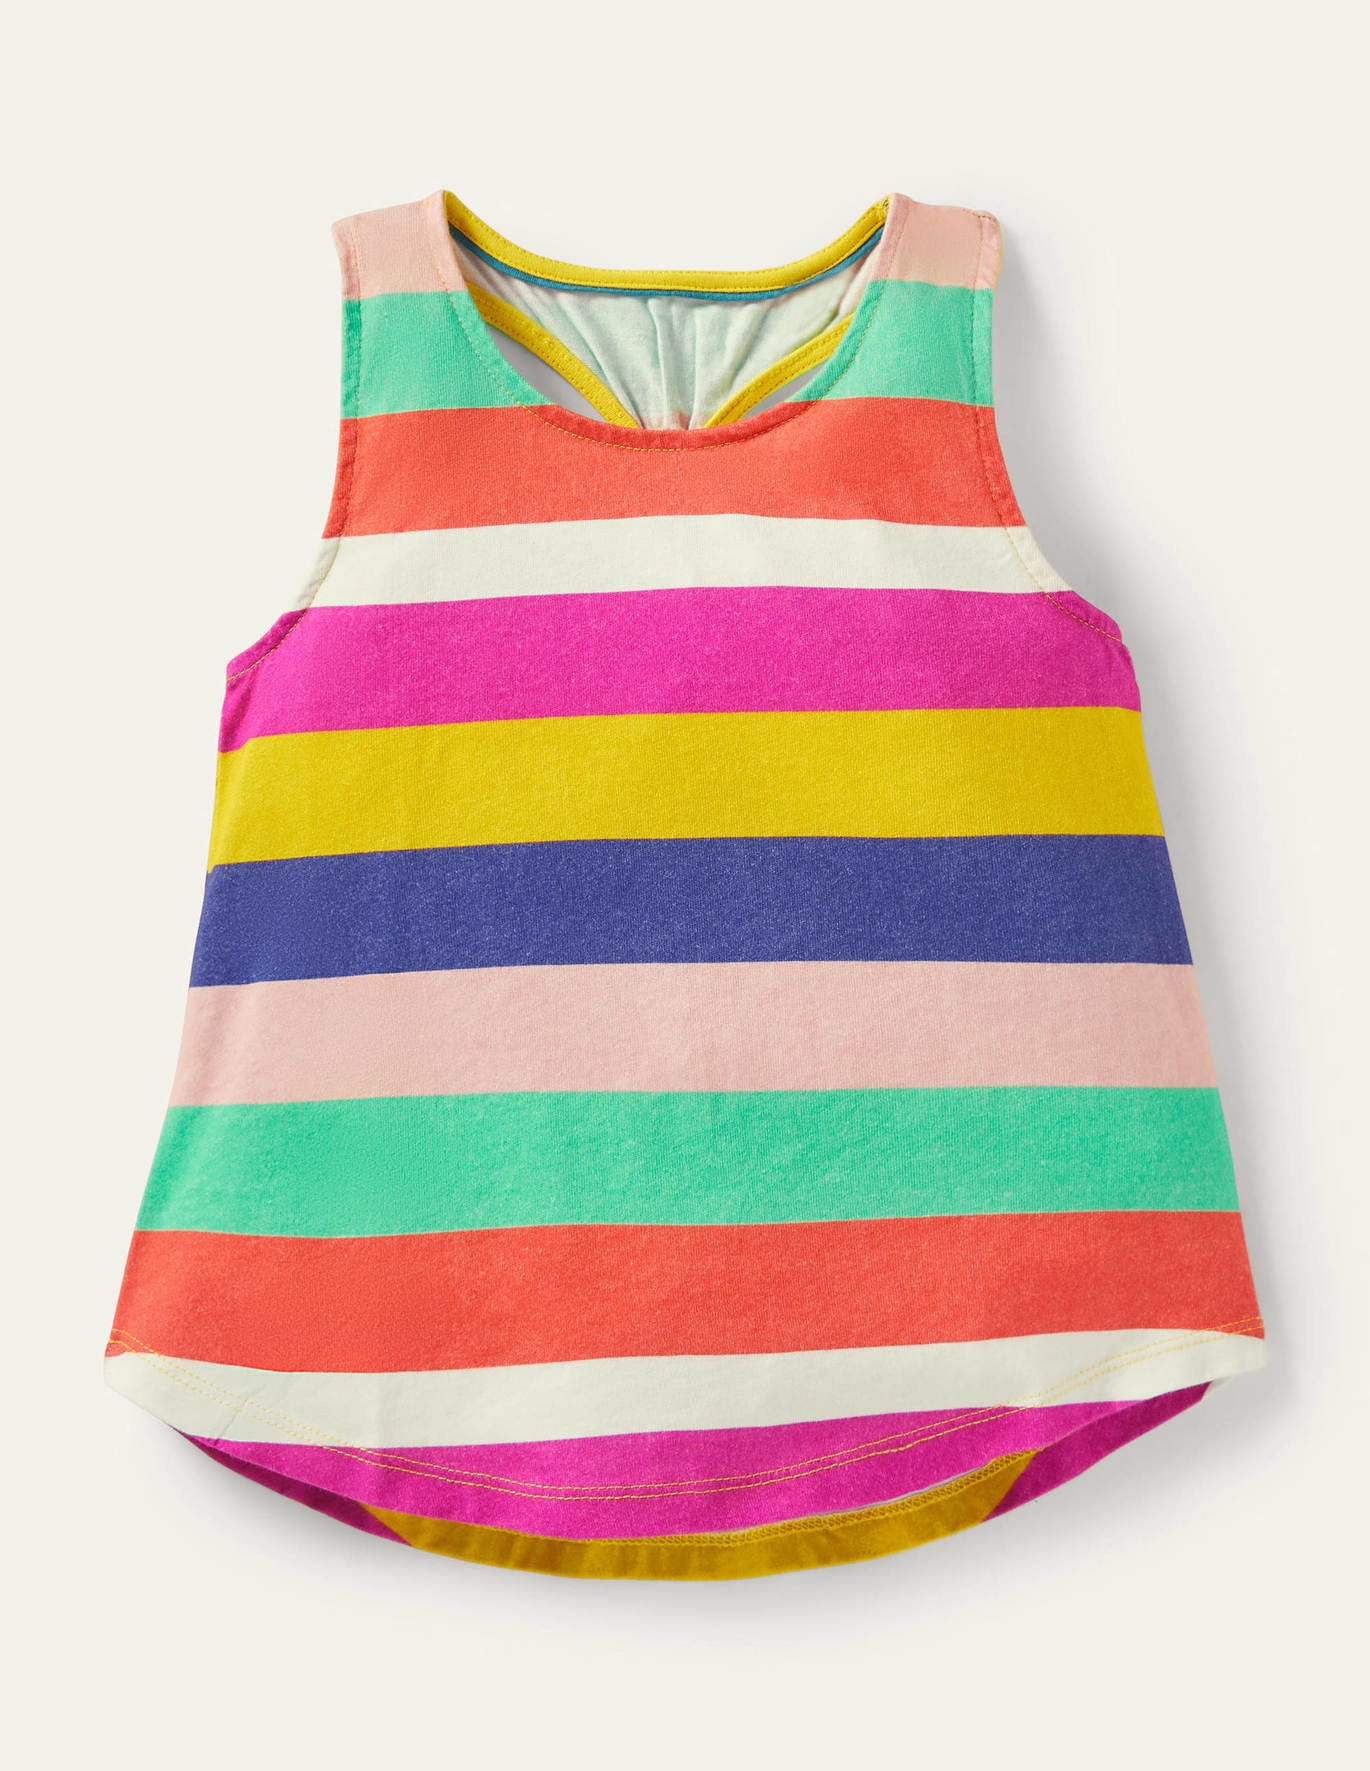 Boden Knot Back Tank Top - Pop Pansy / Daffodil Rainbow